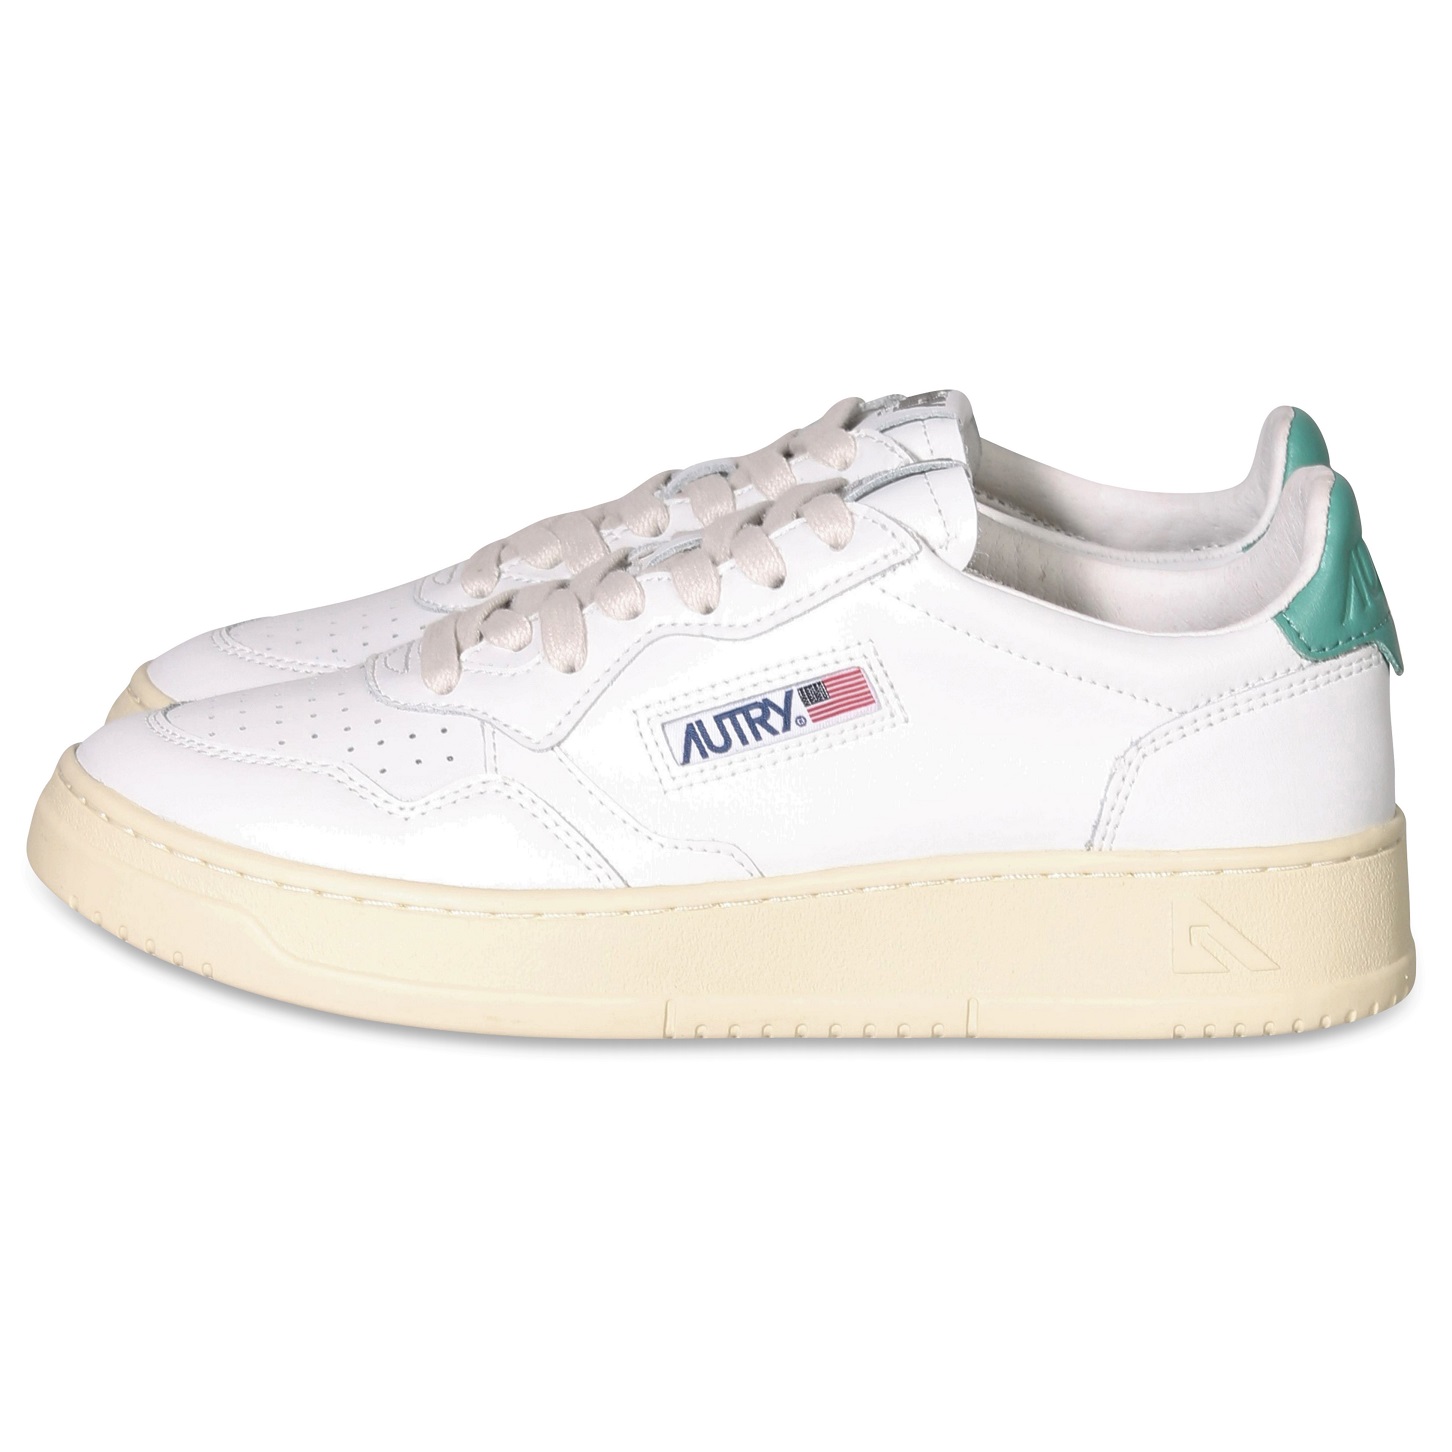 AUTRY ACTION SHOES Sneaker Low in White/Malachi Green 39